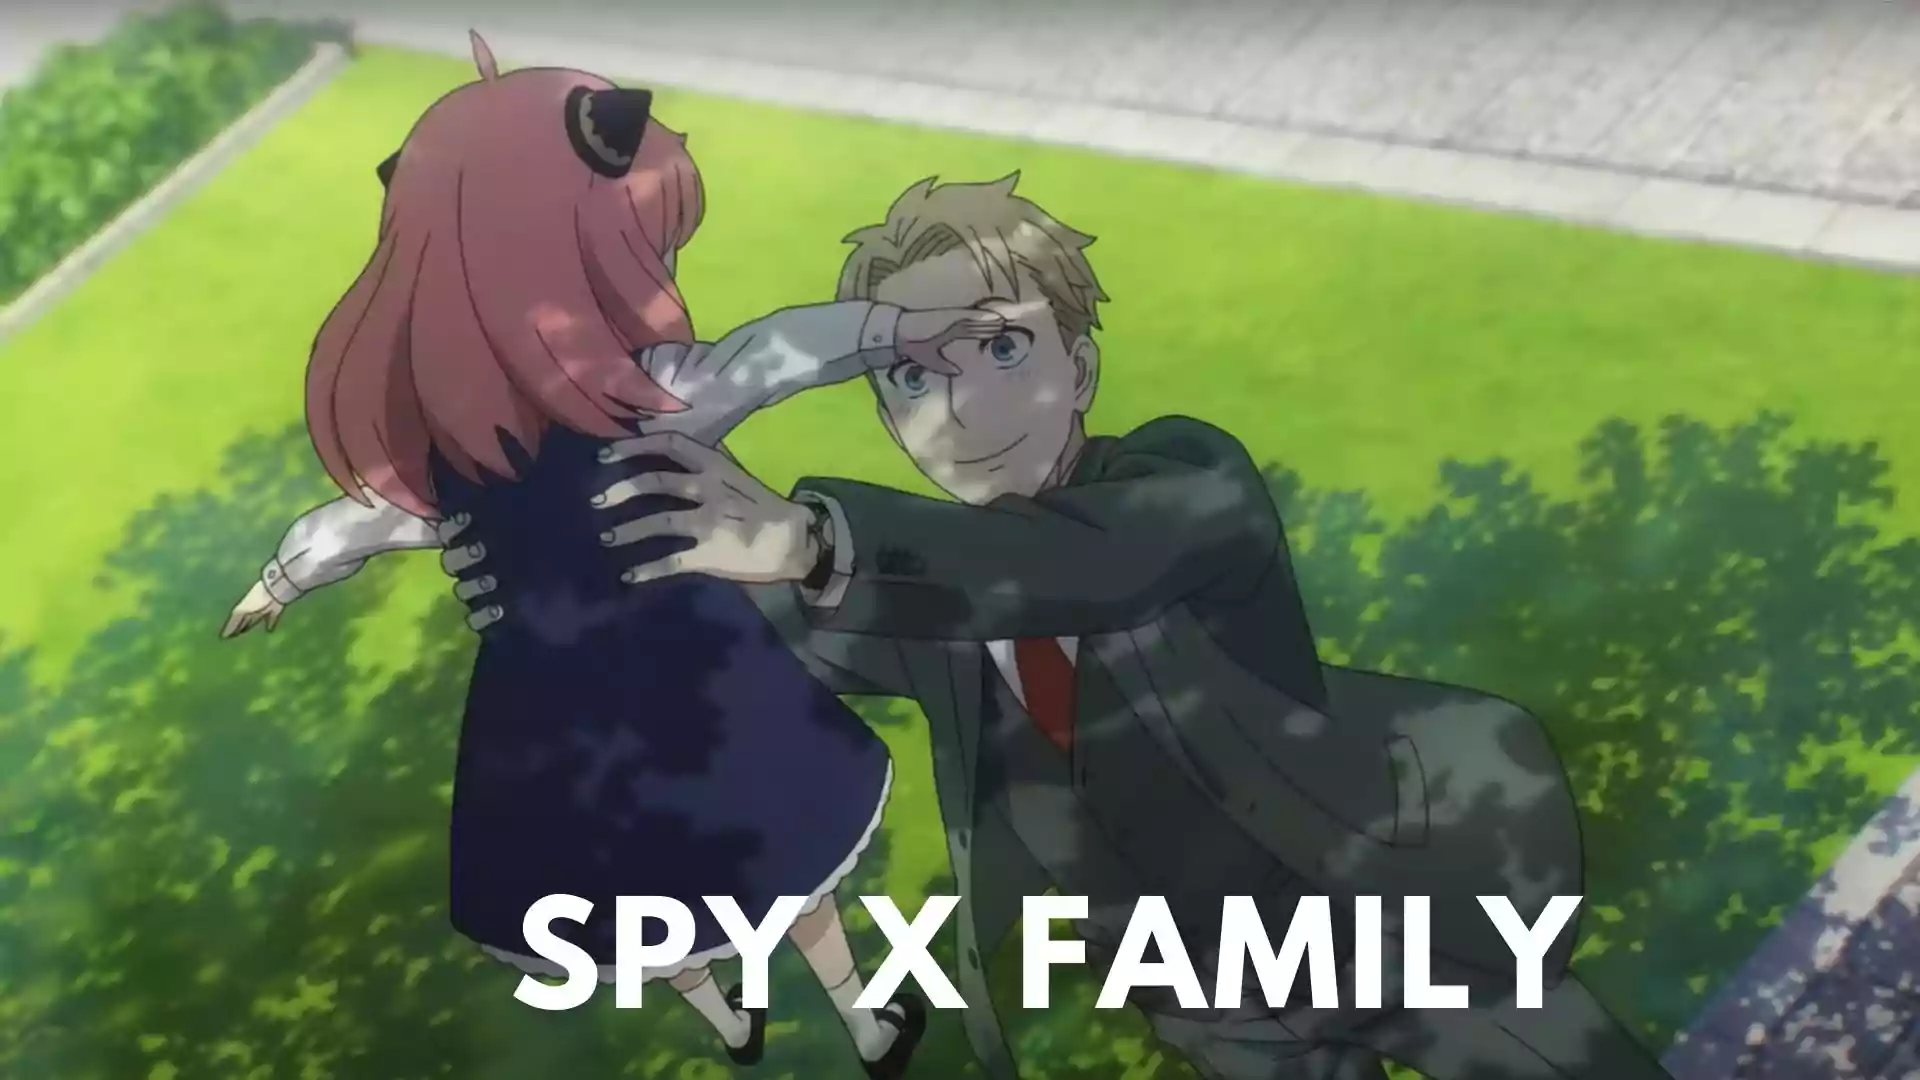 Spy x Family Wallpaper and Image